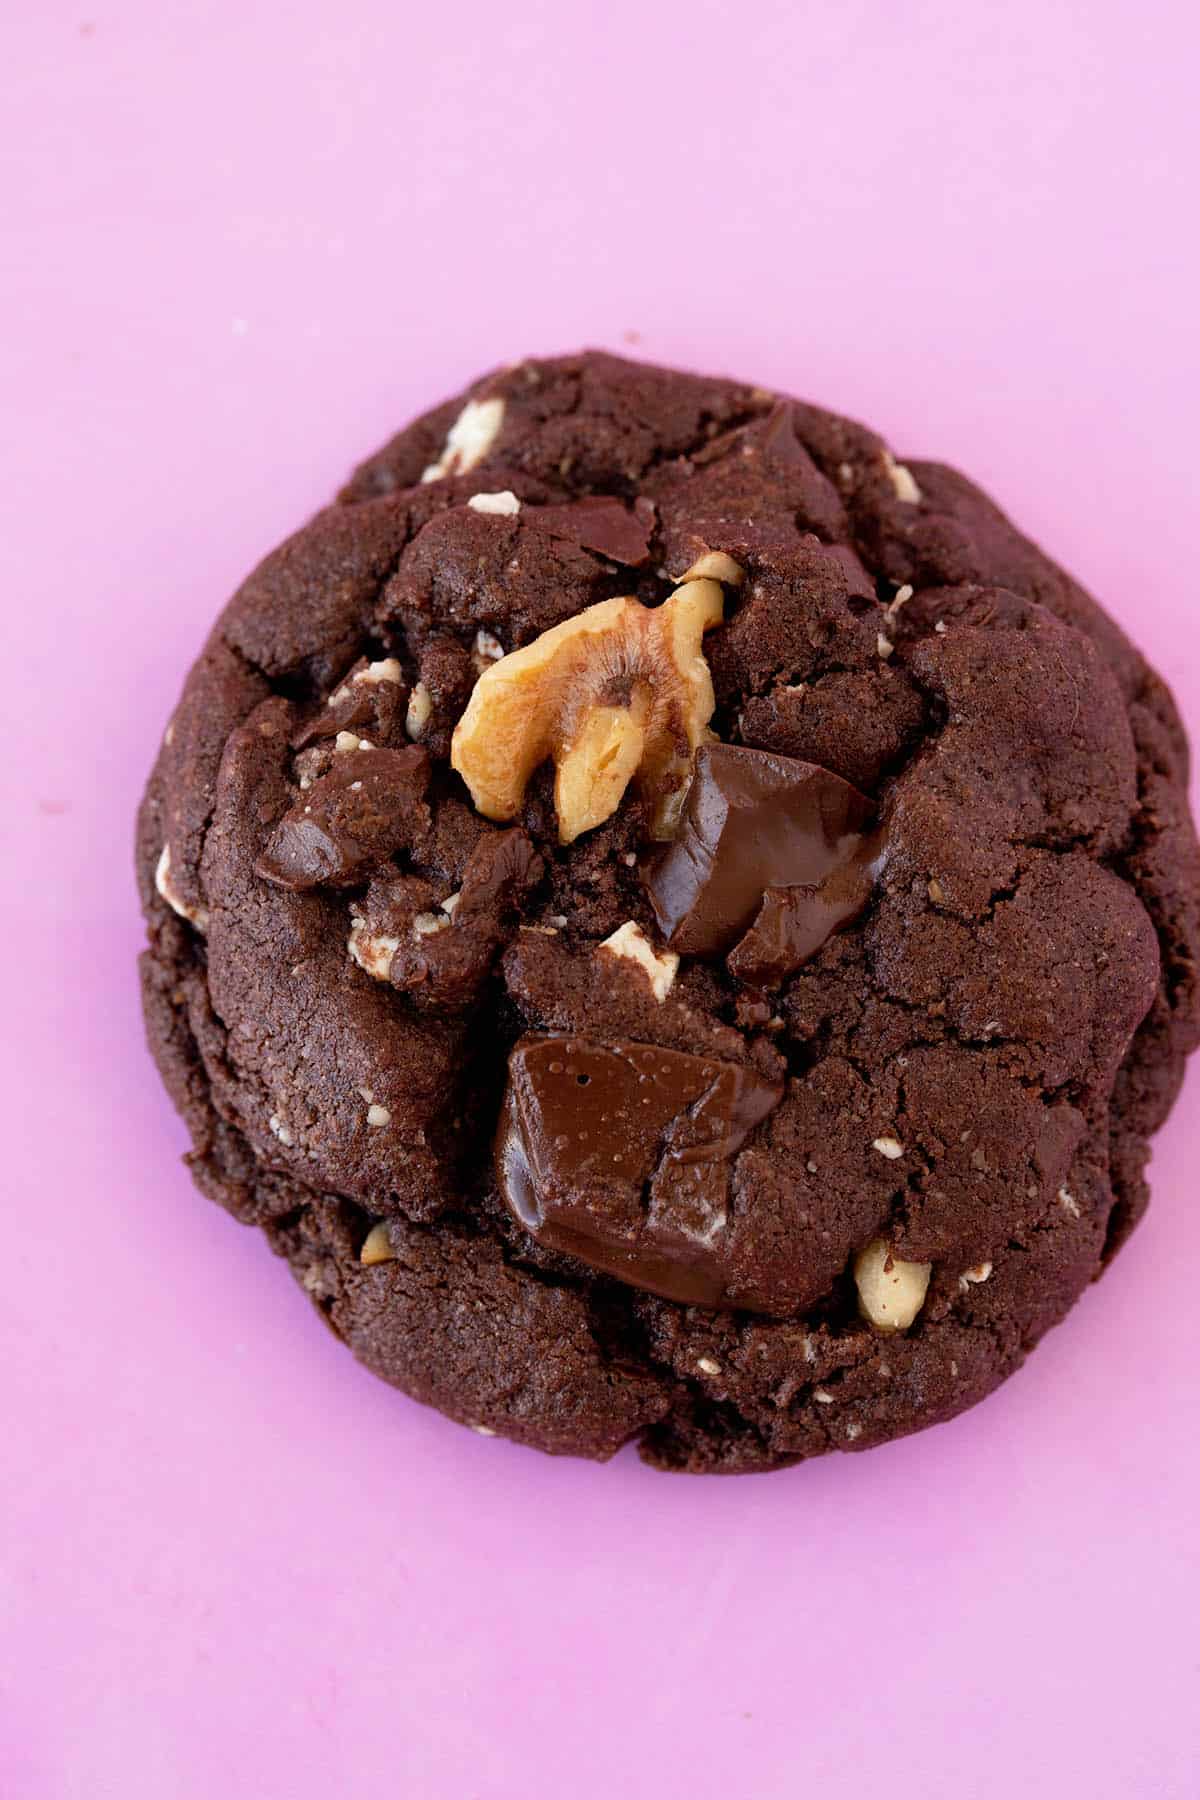 Top view of a chocolate cookie on a pink background